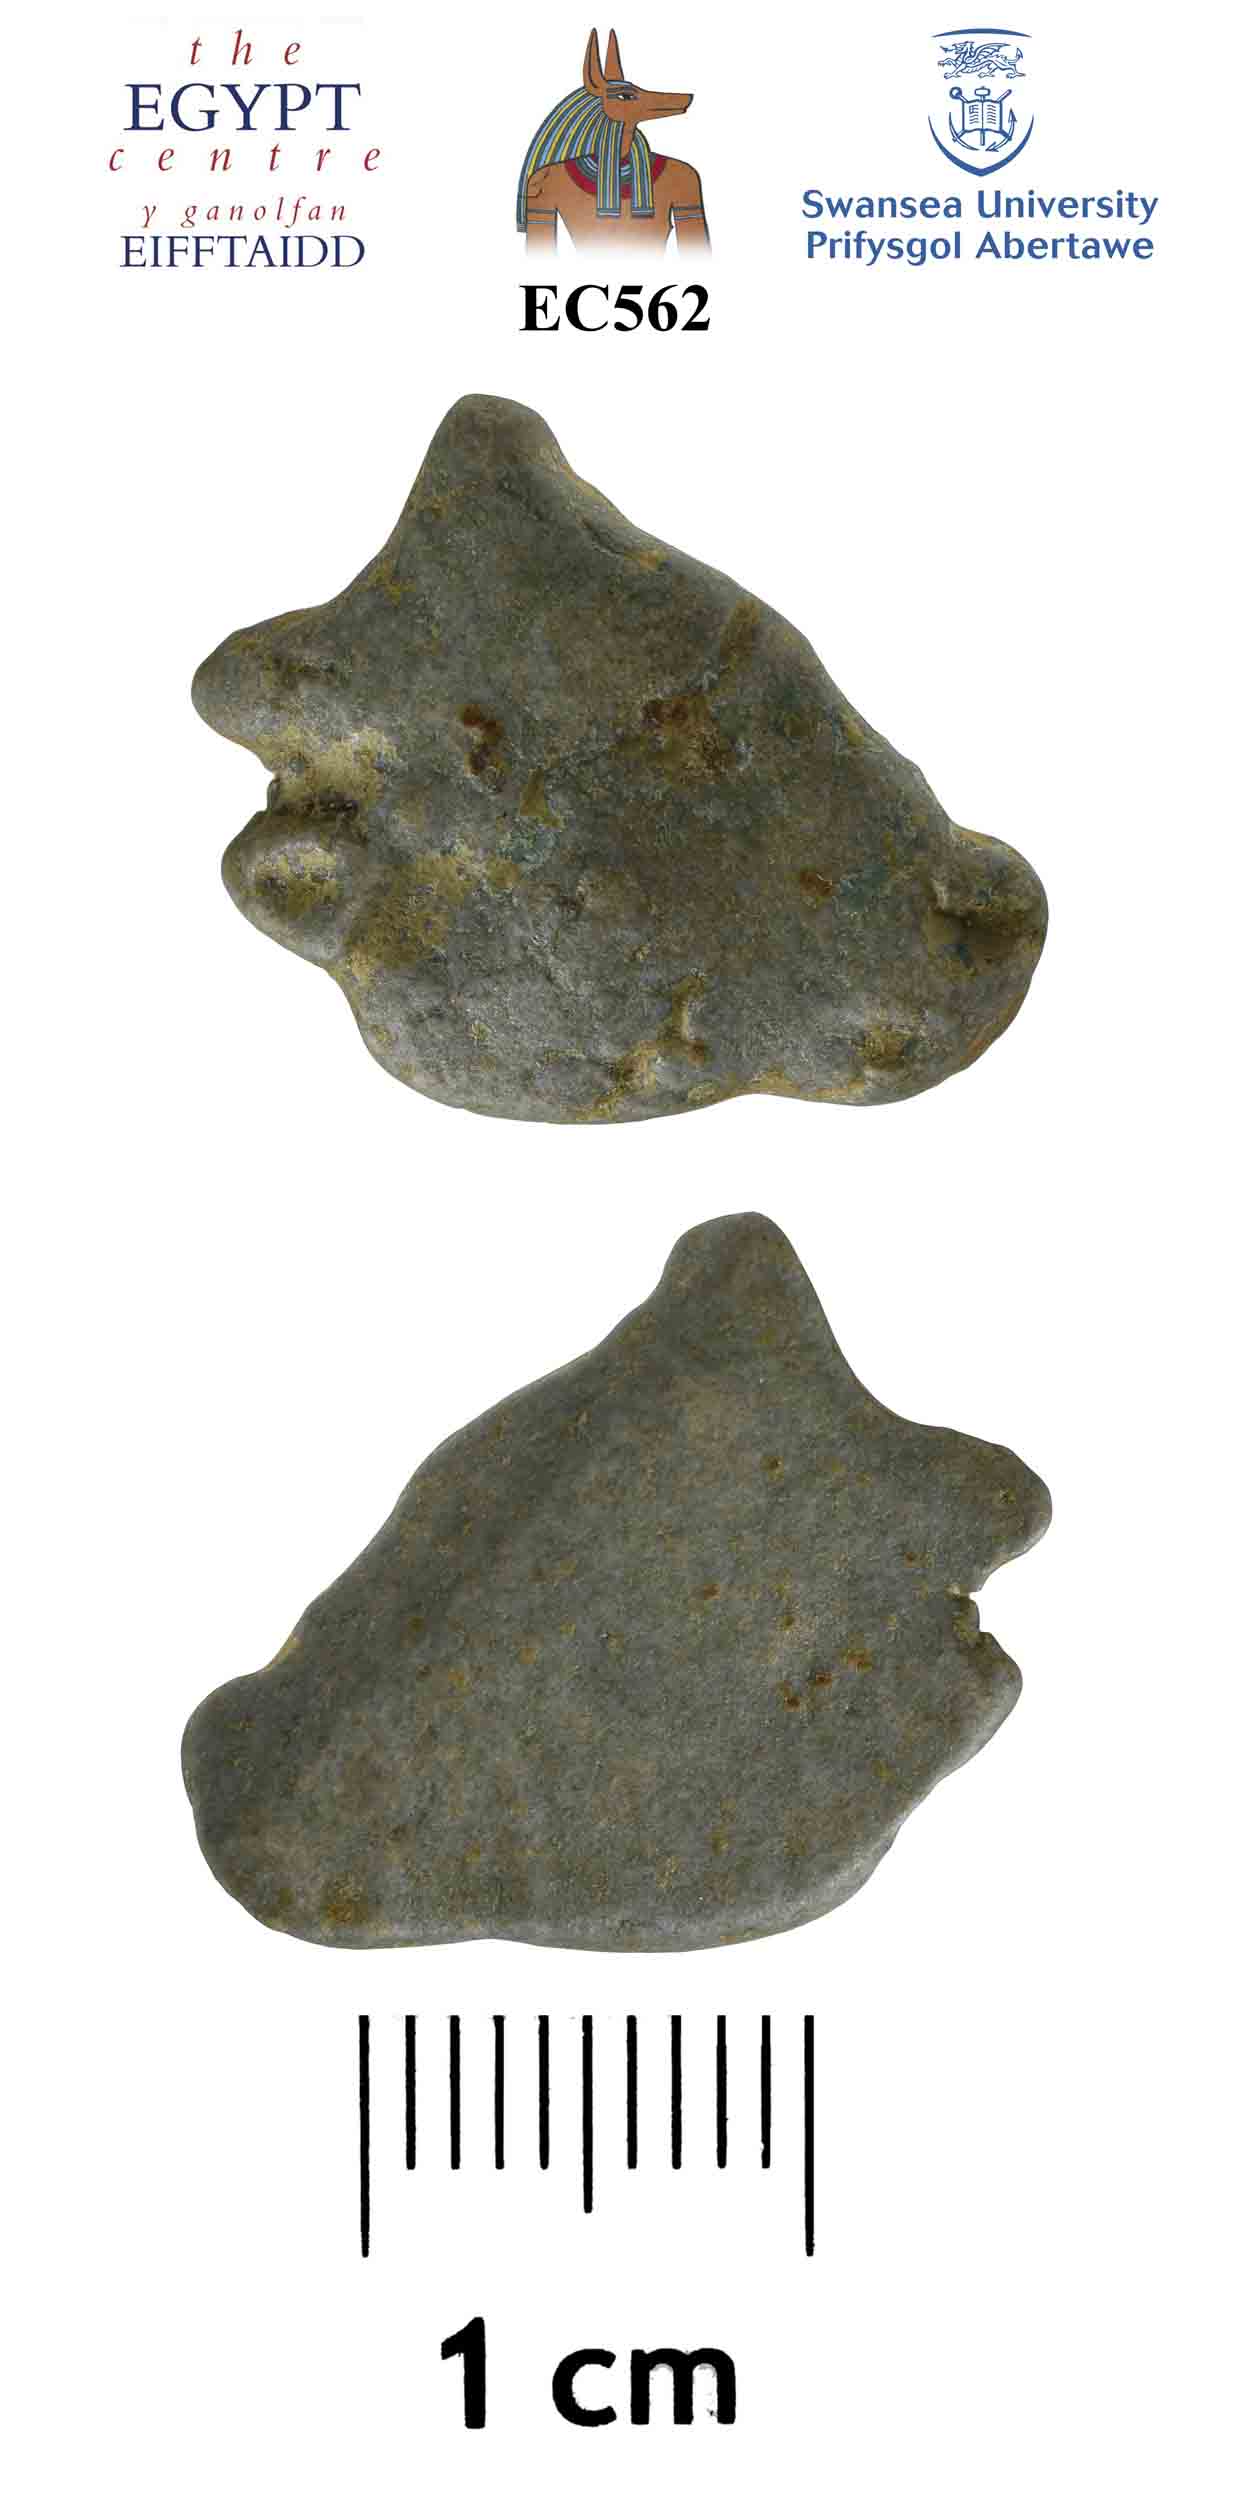 Image for: Faience amulet of a bull's head